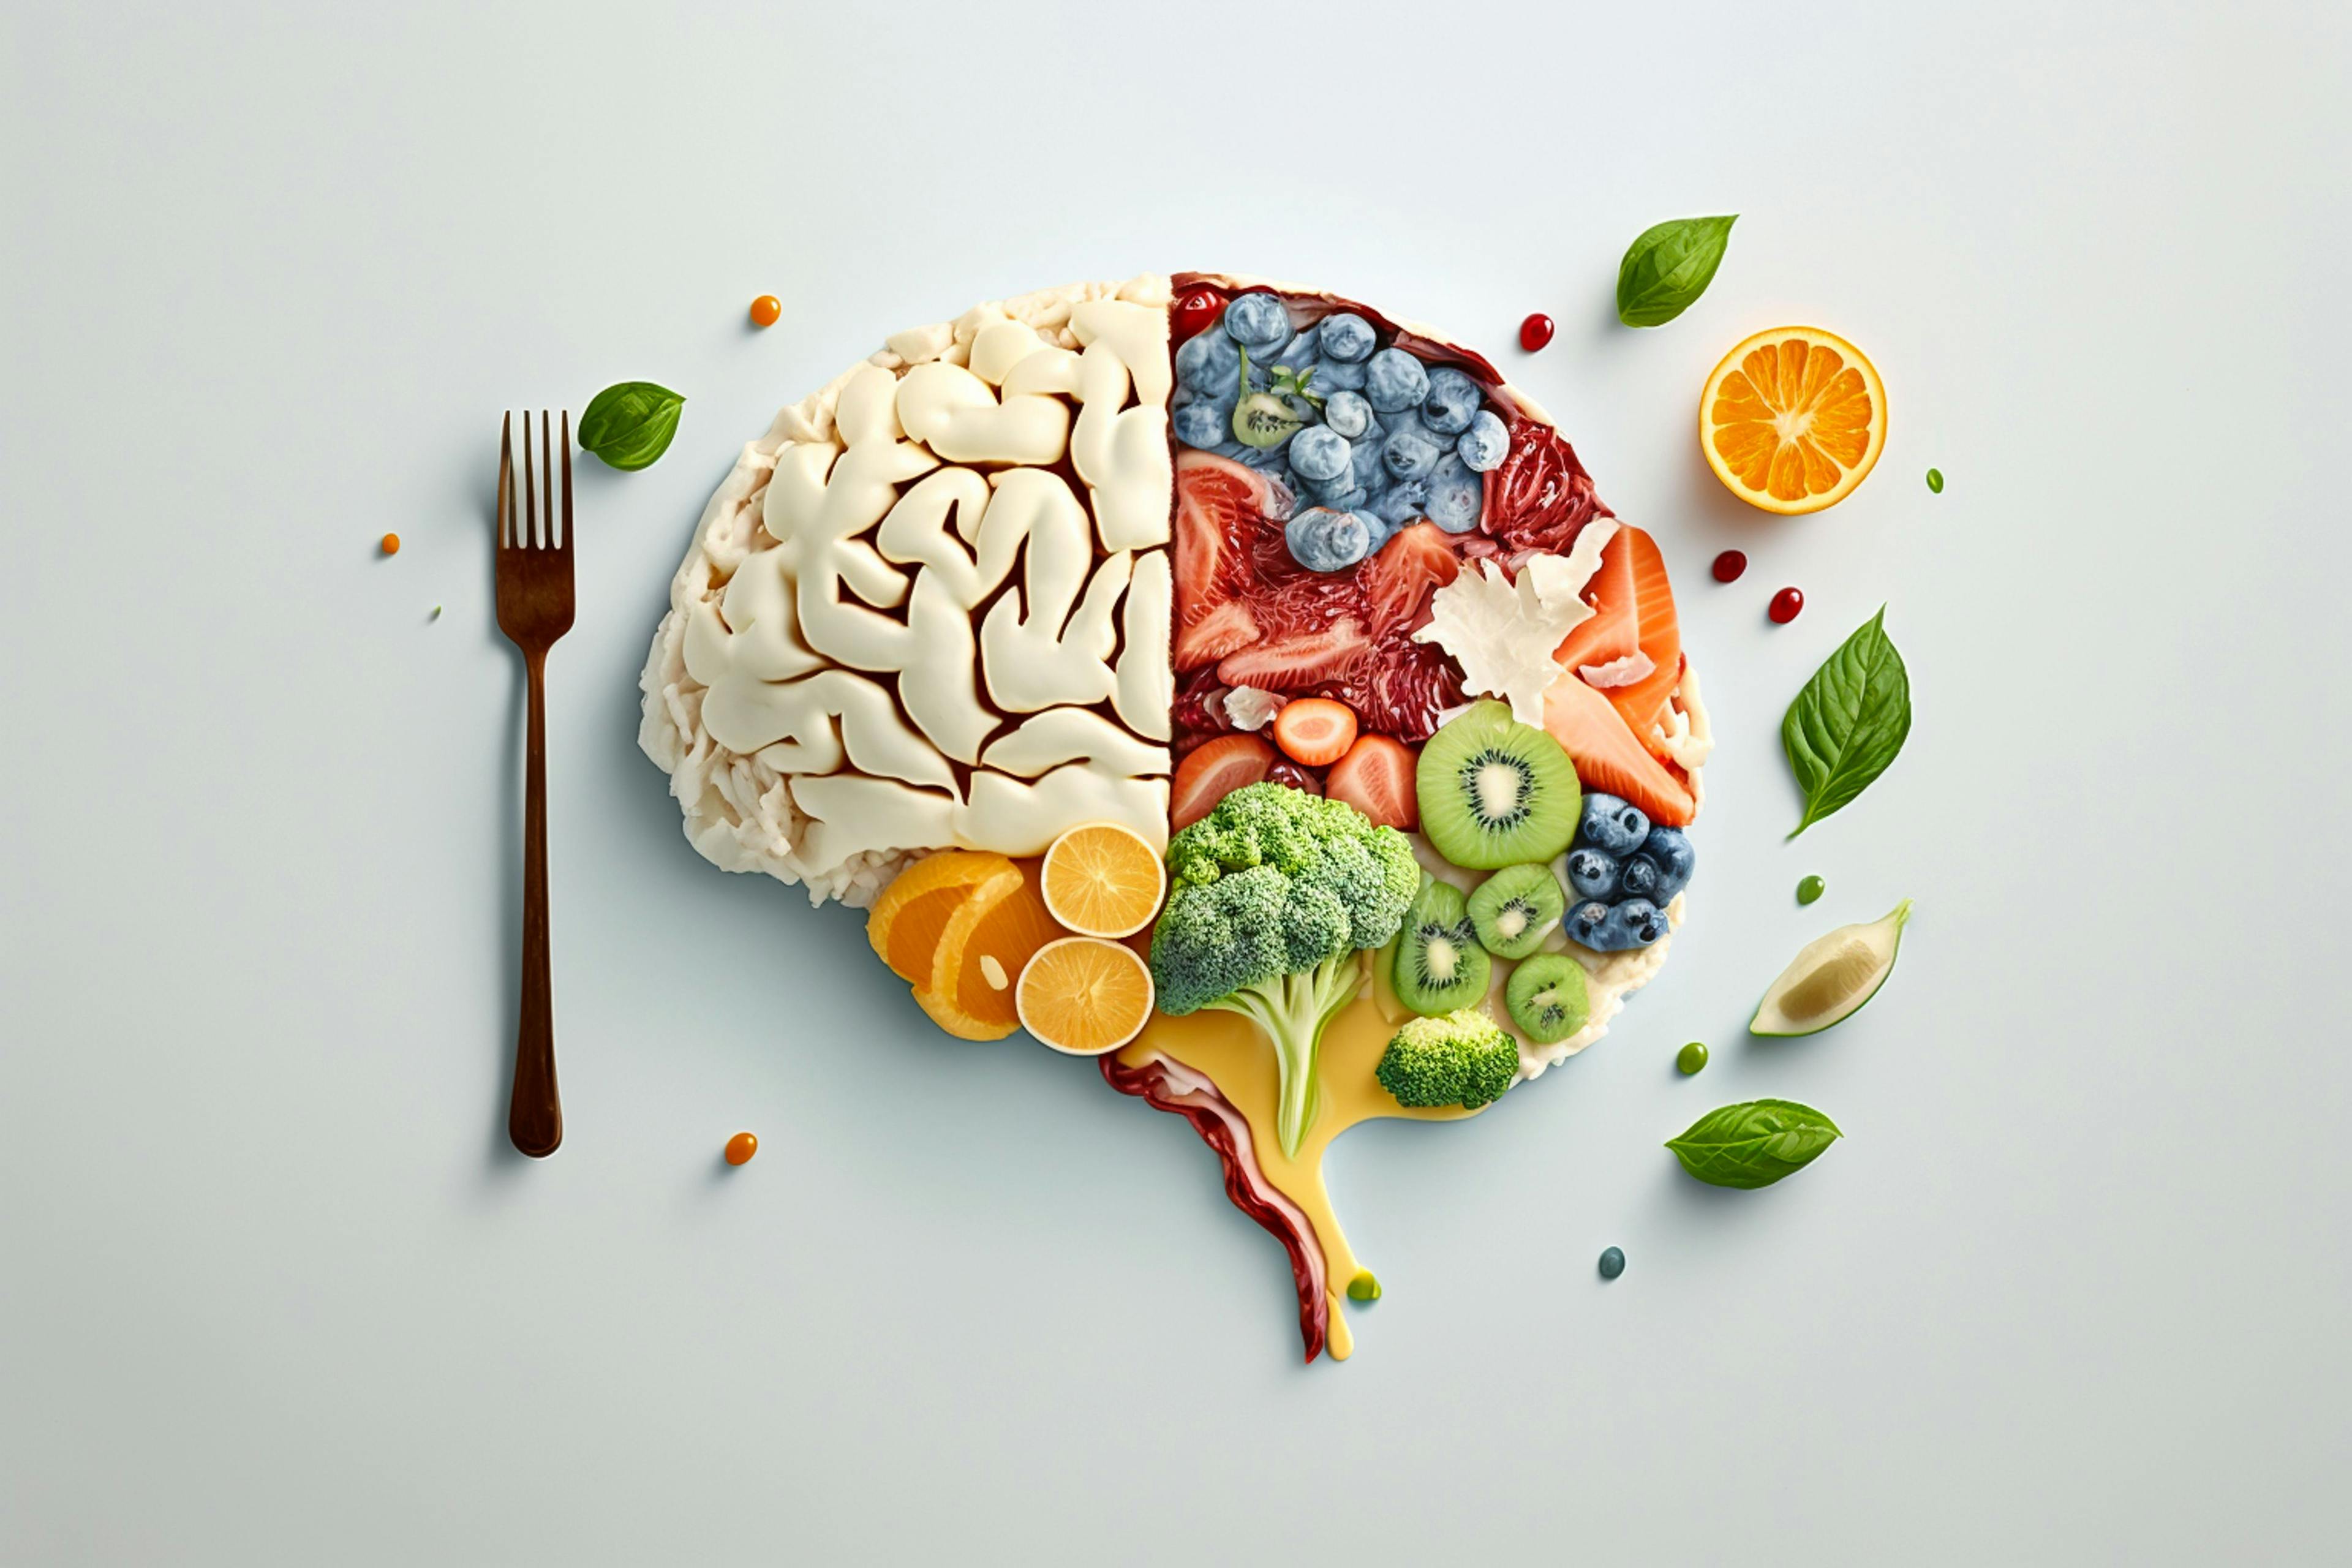 Connections Between Food Additives and Psychiatric Disorders